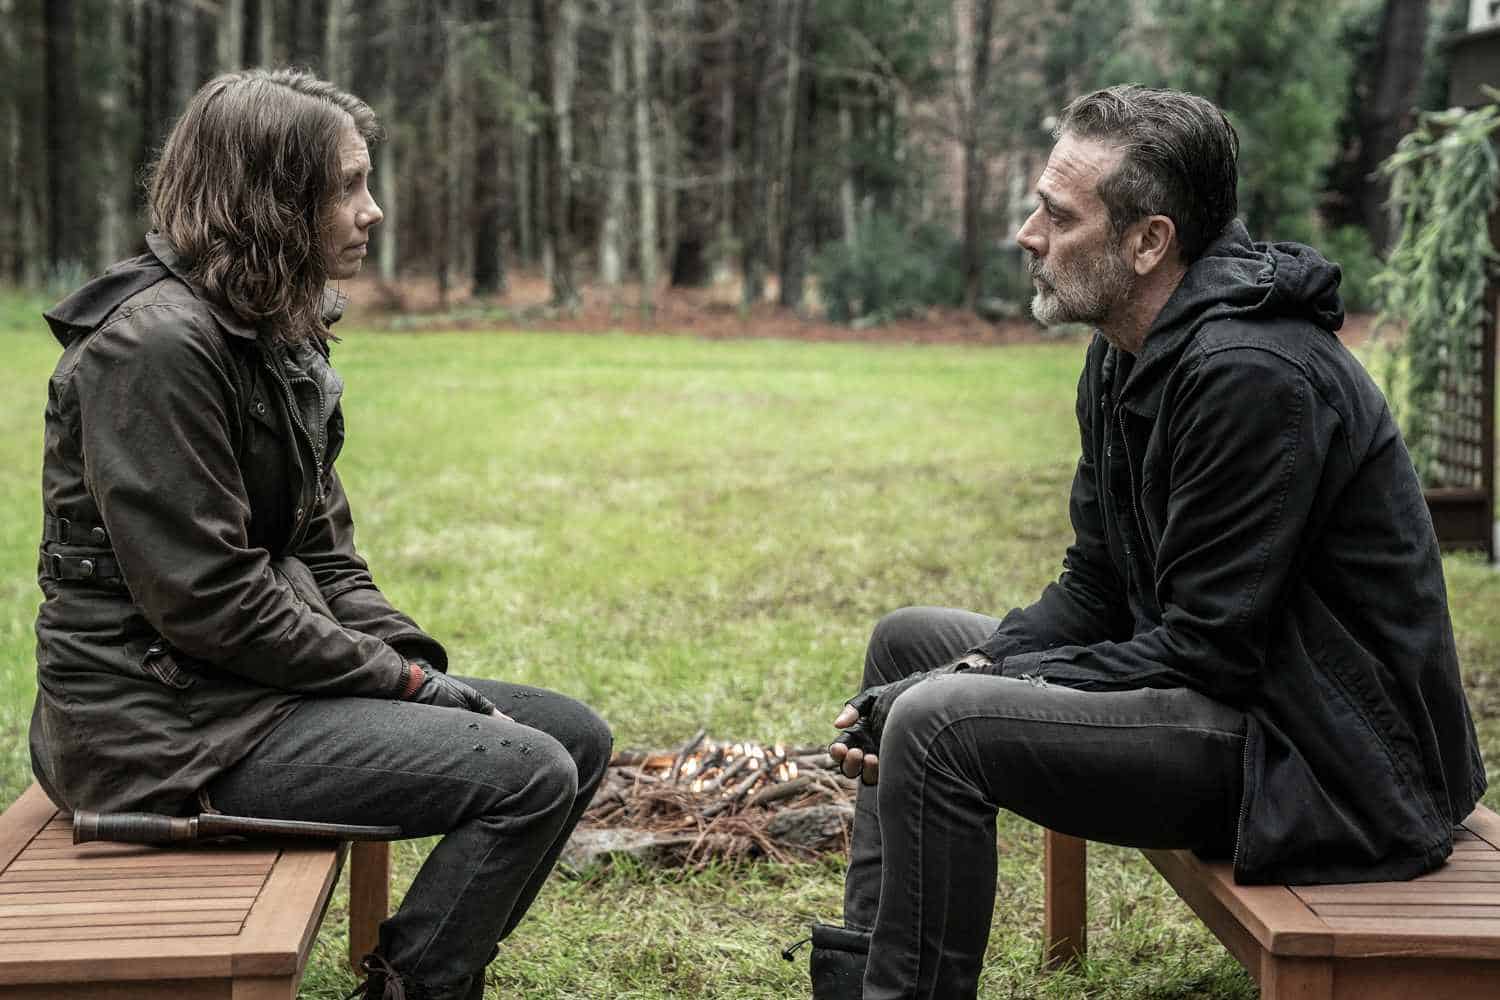 A still from the final episode of the show, The Walking Dead (Credits: People)